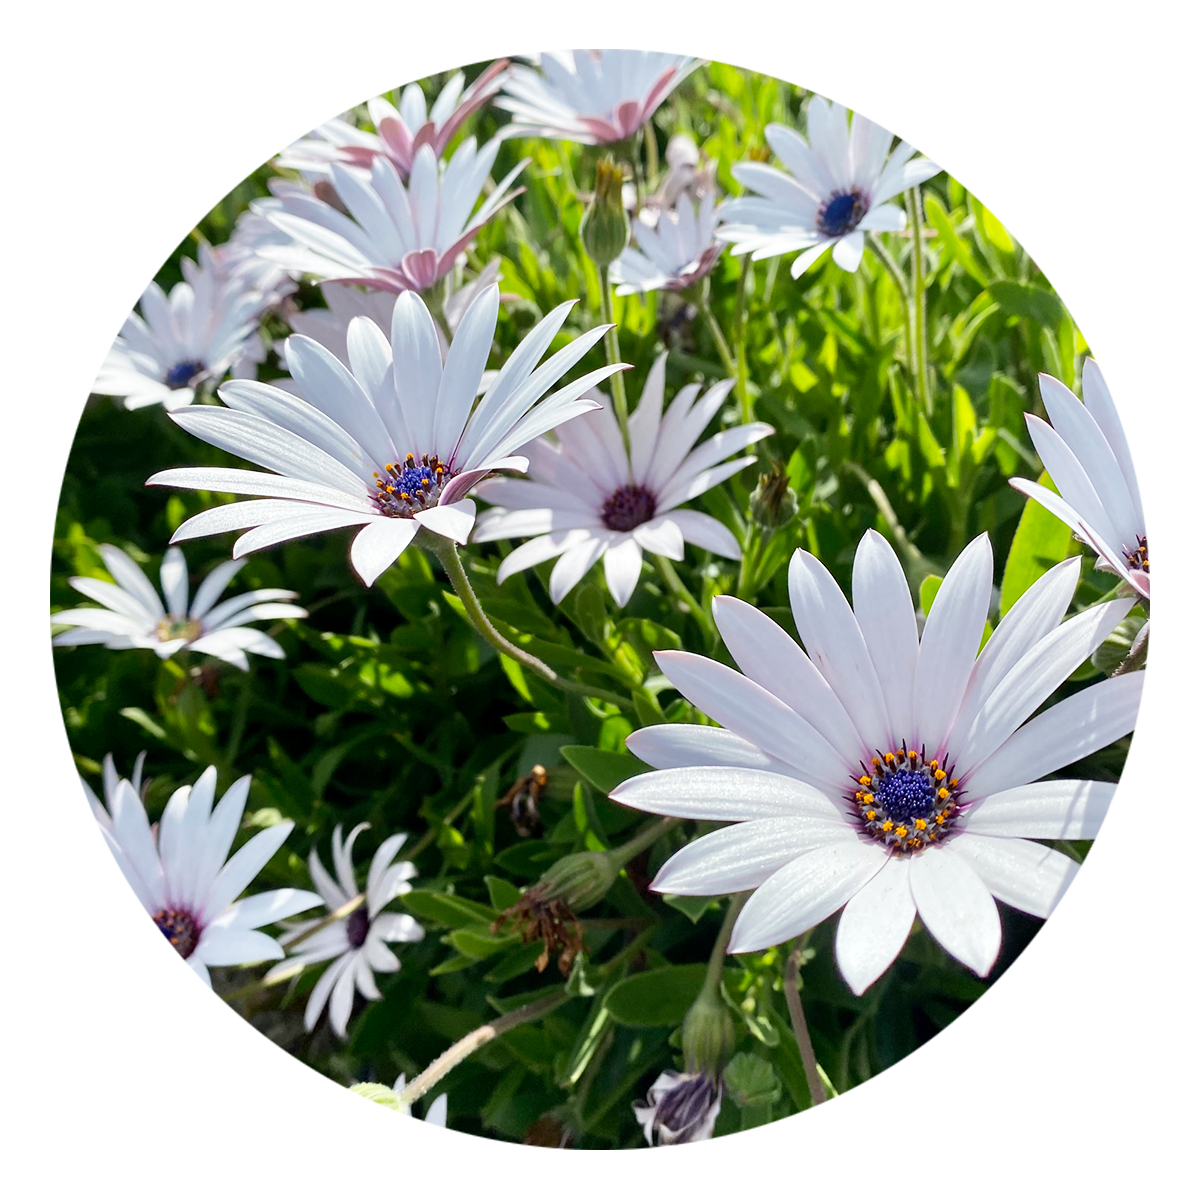 View Here: African Daisy 